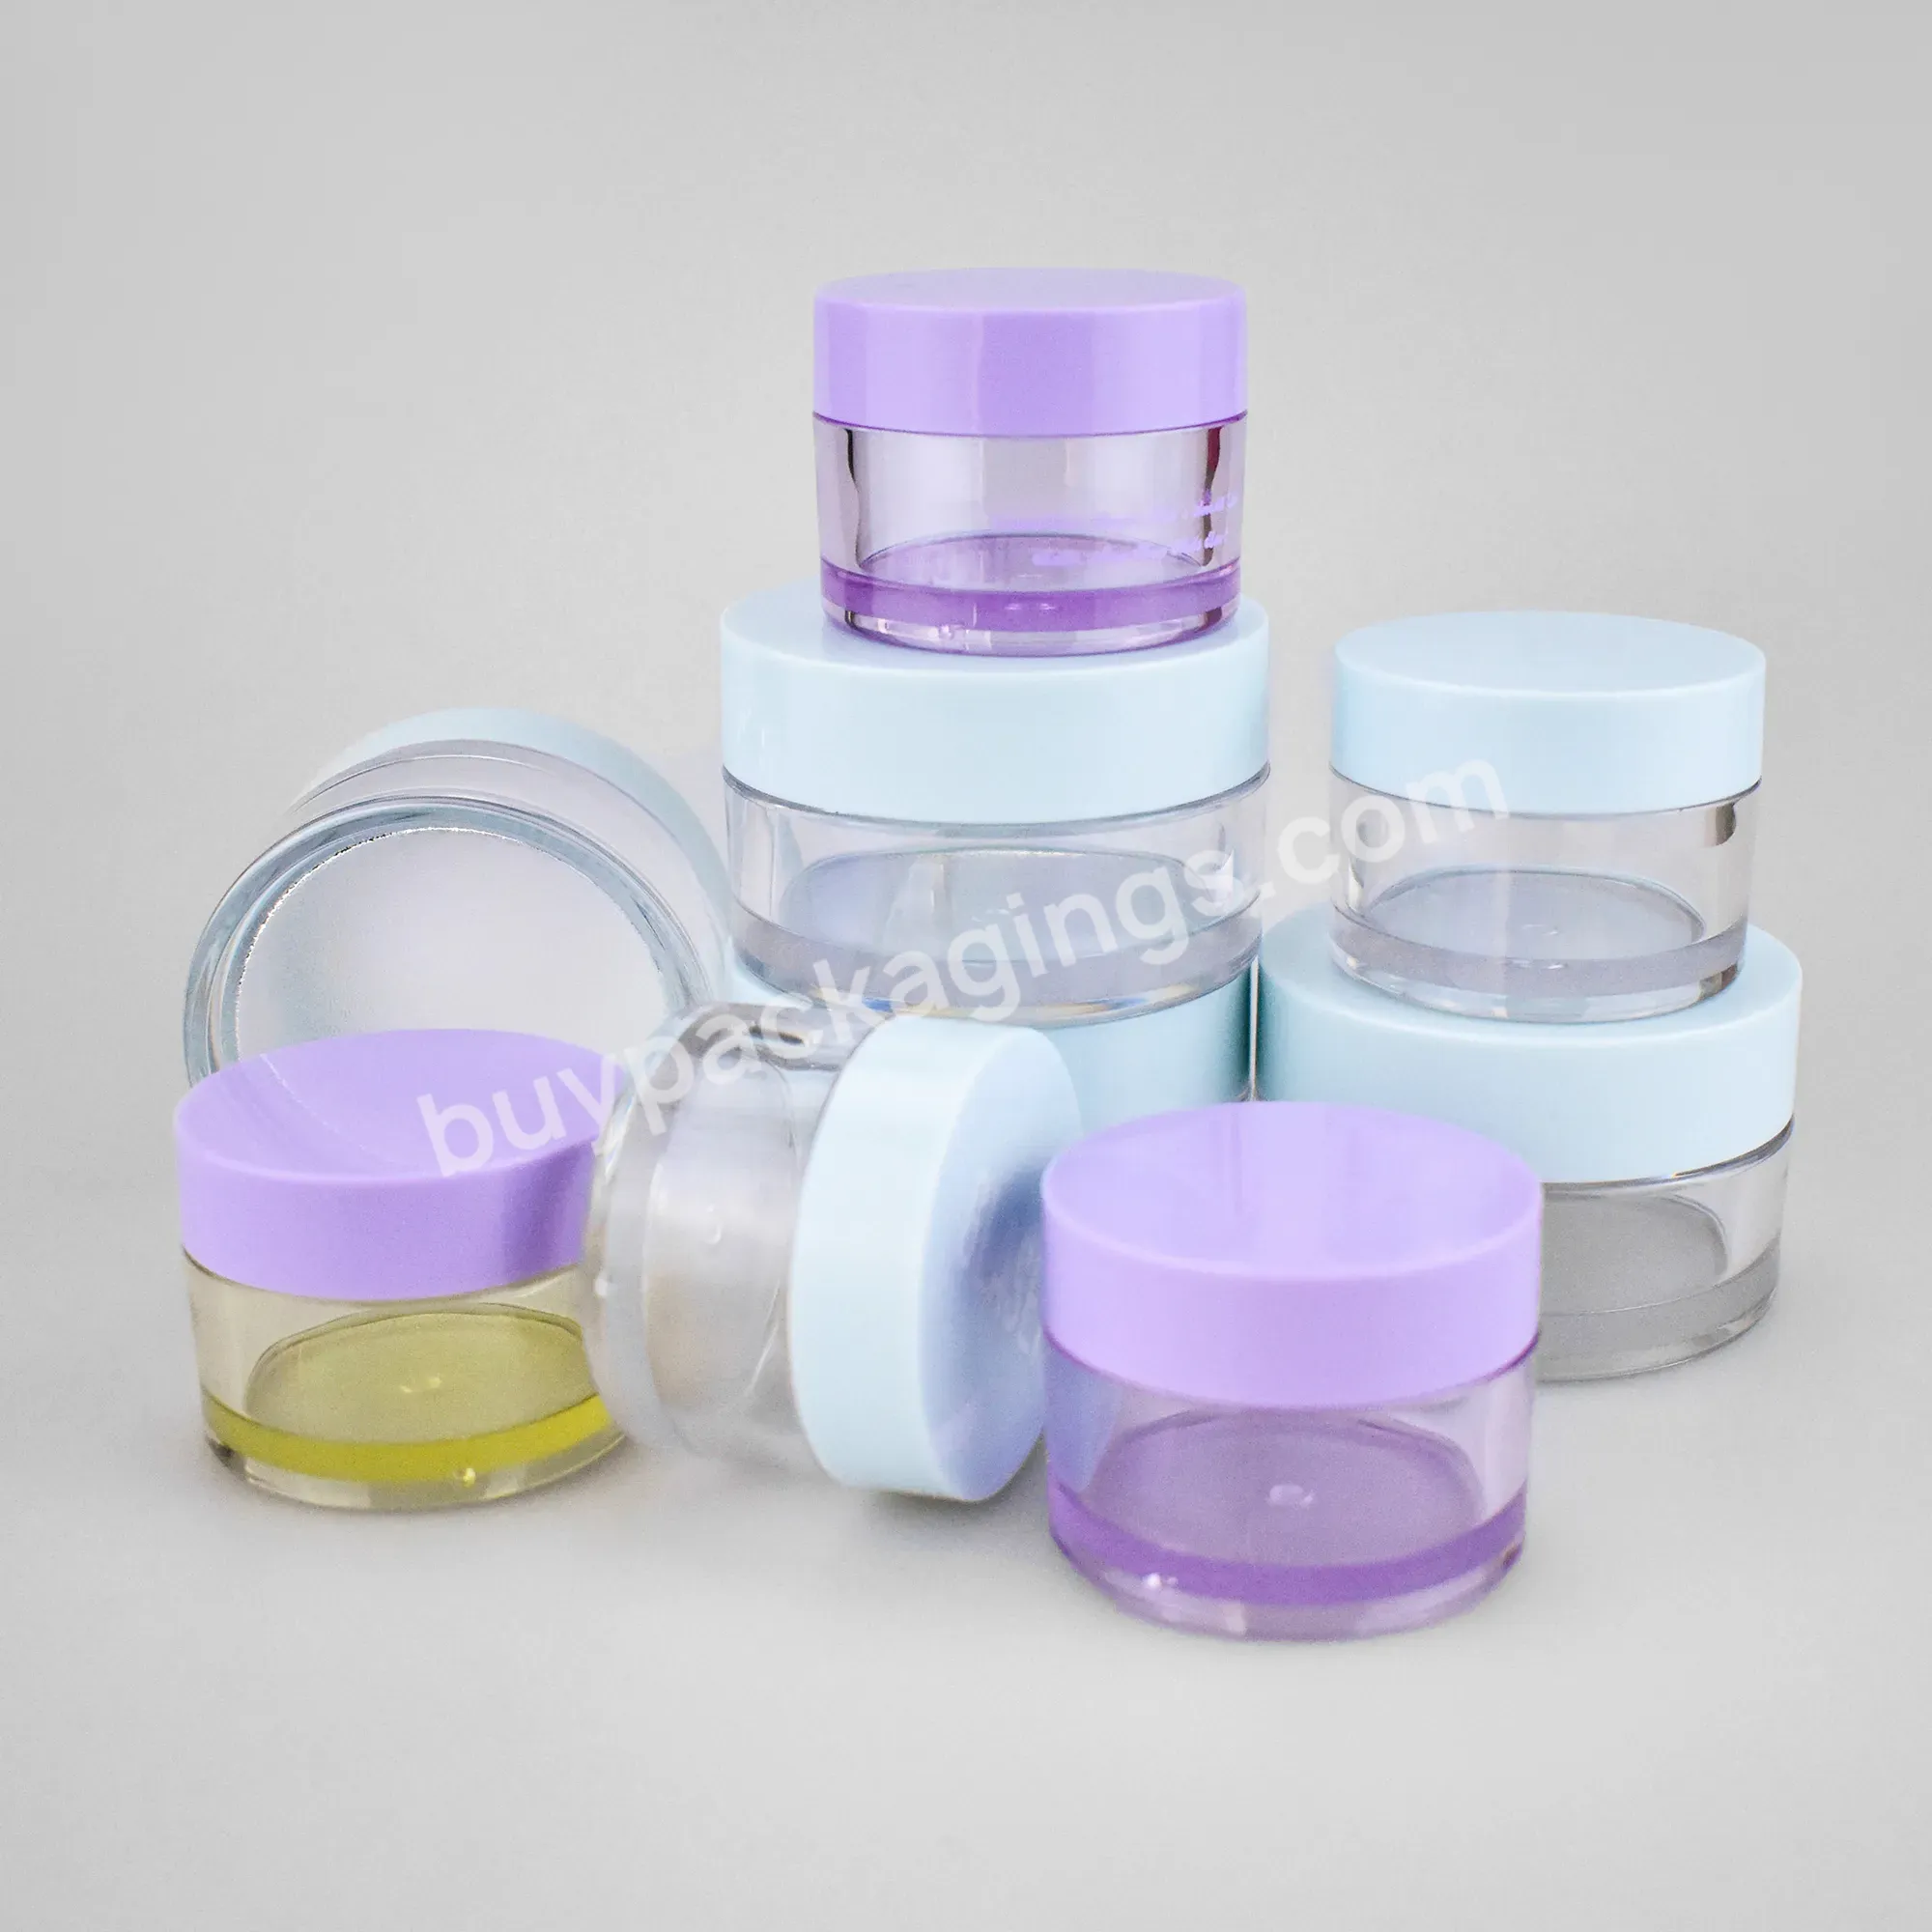 5g 10g Cosmetic Petg Jars,Makeup Containers With Lids Empty Plastic Travel Bottles - Buy Cosmetic Jars And Bottles,Cosmetic Petg Jars,Recycled Plastic Cosmetic Jars.